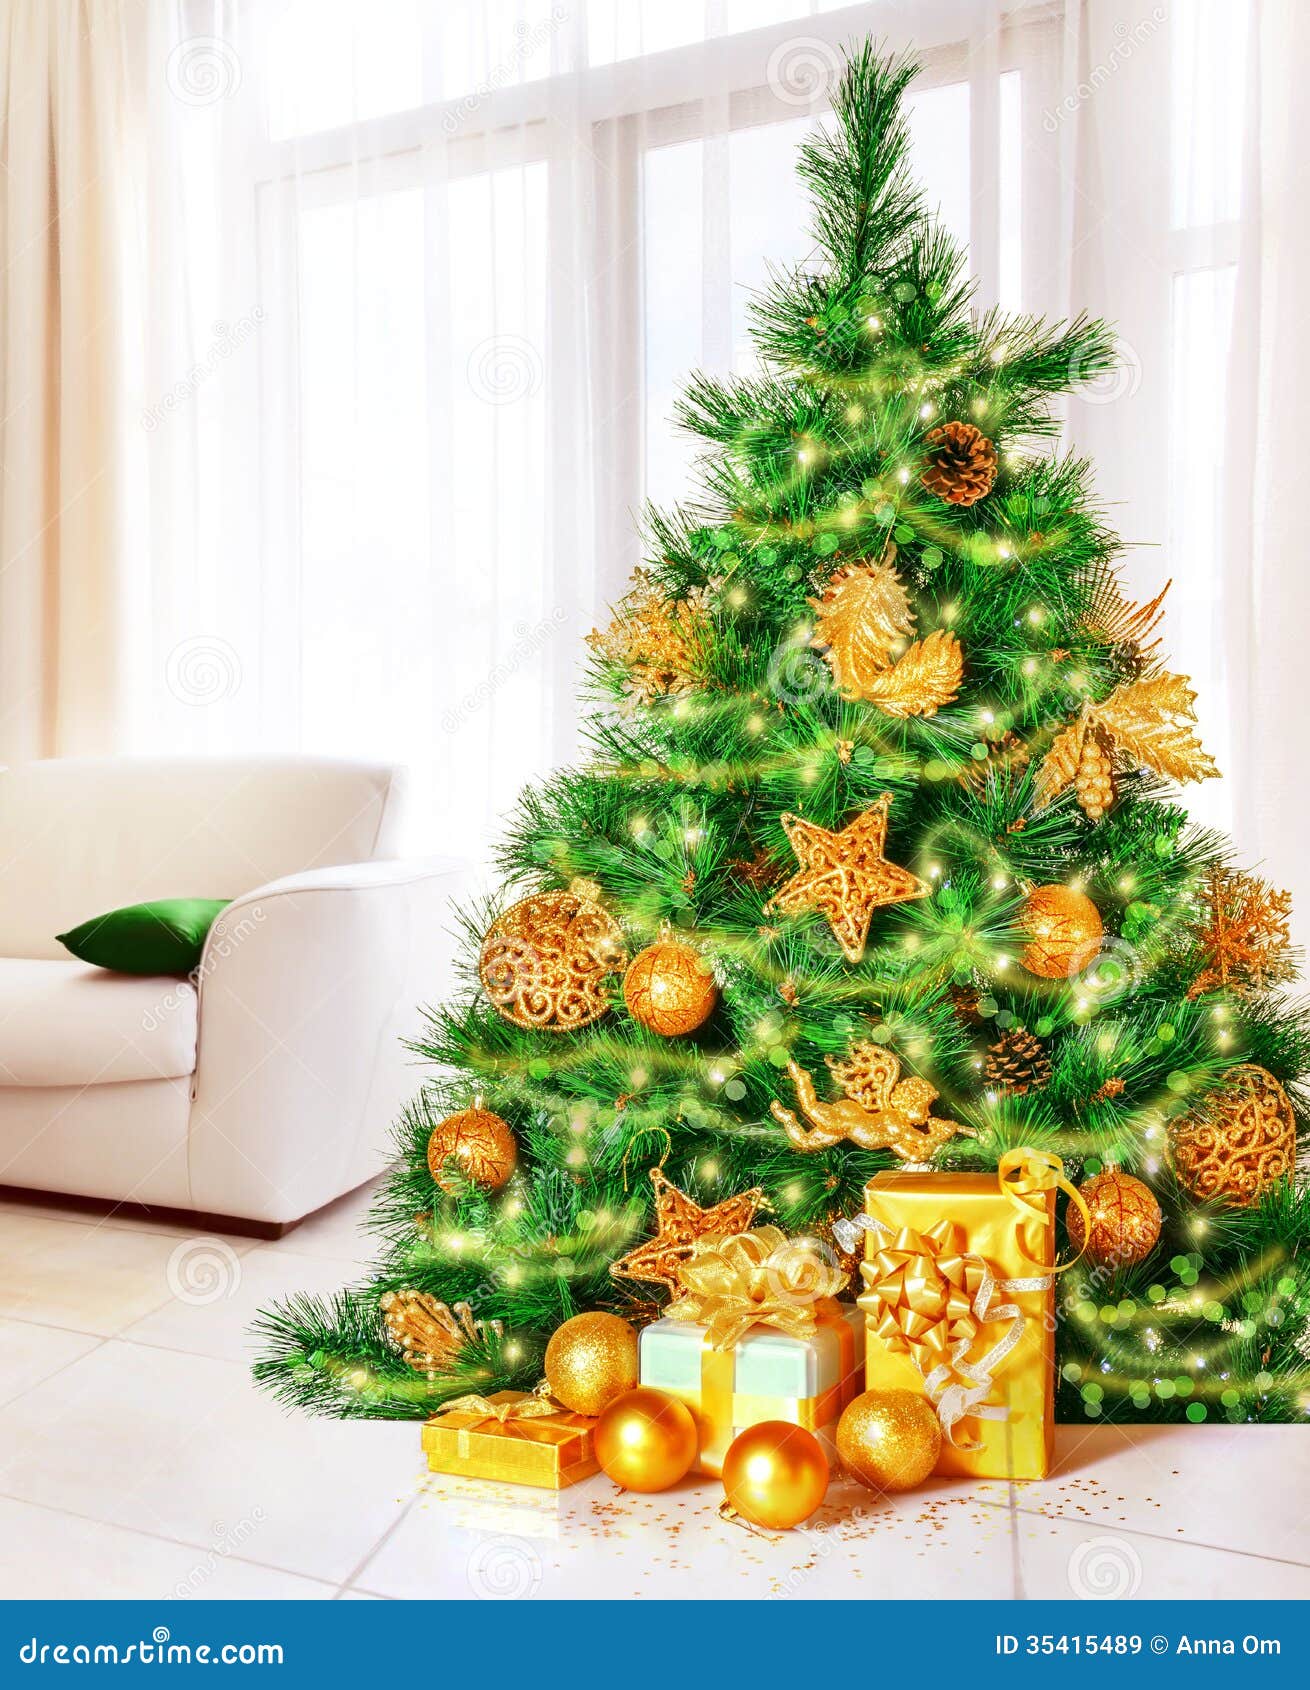 Christmas Tree At Home Royalty Free Stock Images - Image: 35415489